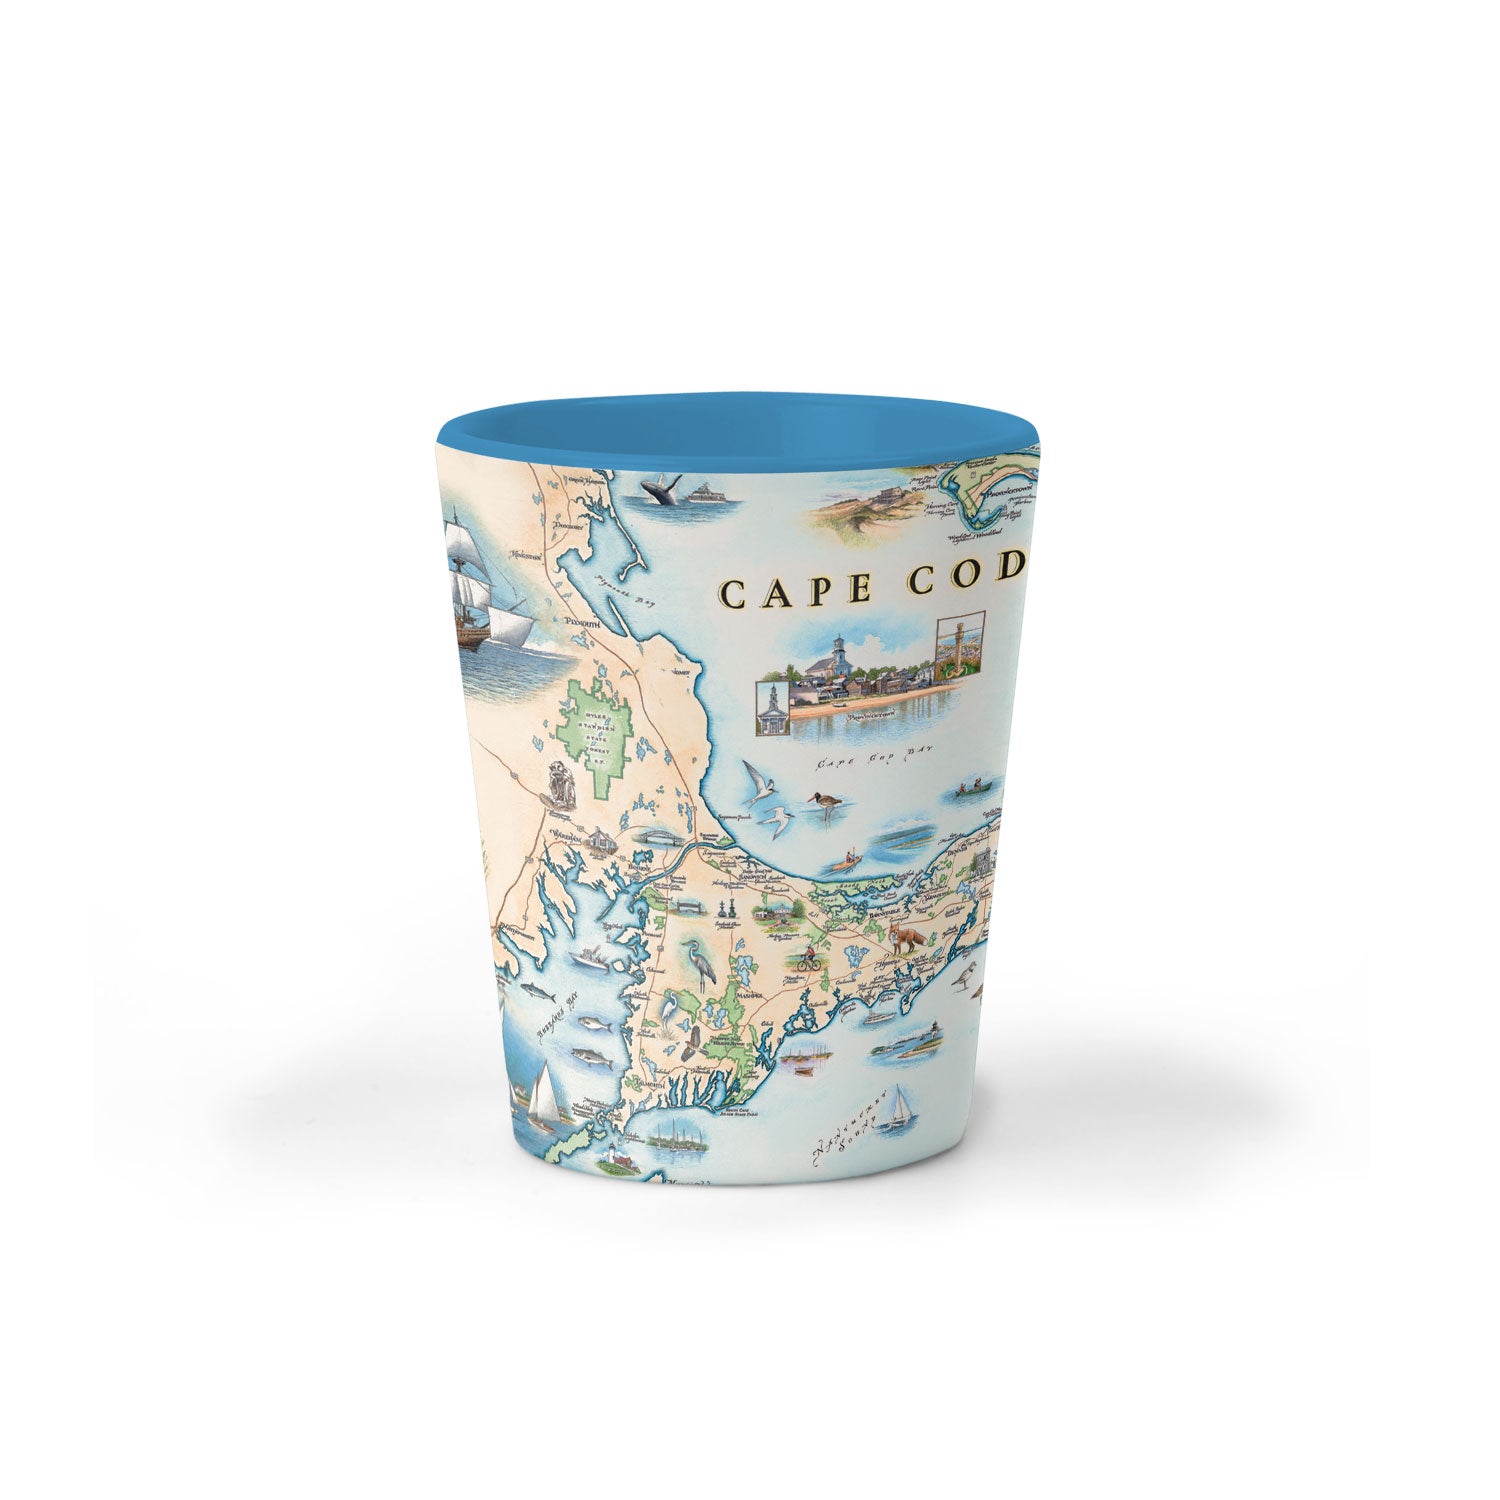 Massachusetts' Cape Cod Map ceramic shot glass in earth tone colors of blues and beiges. Featuring Plymouth Rock, fish, crane, fox, Provincetown, canoeing, biking, beach, and ocean.